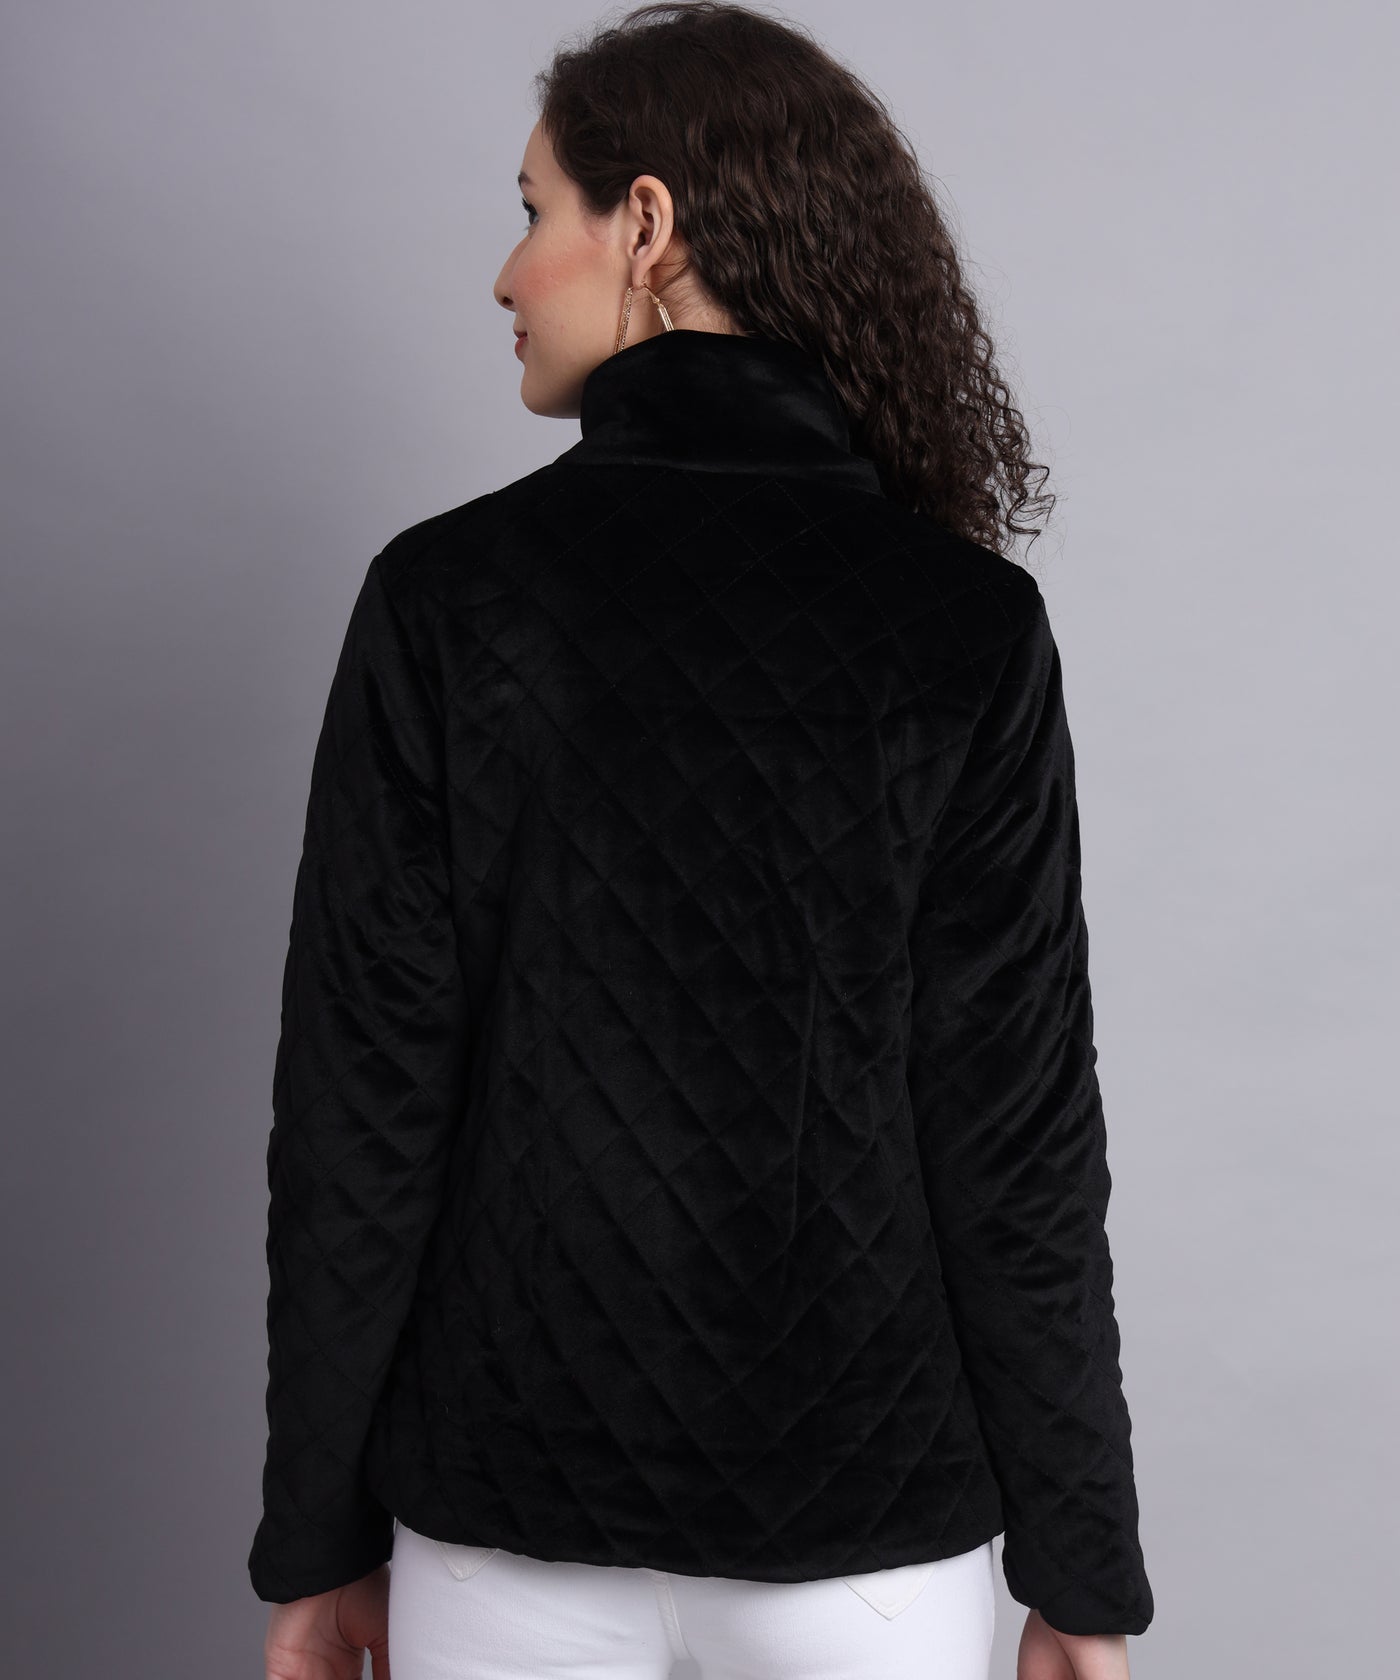 Black diamond quilted jacket - Aw6112